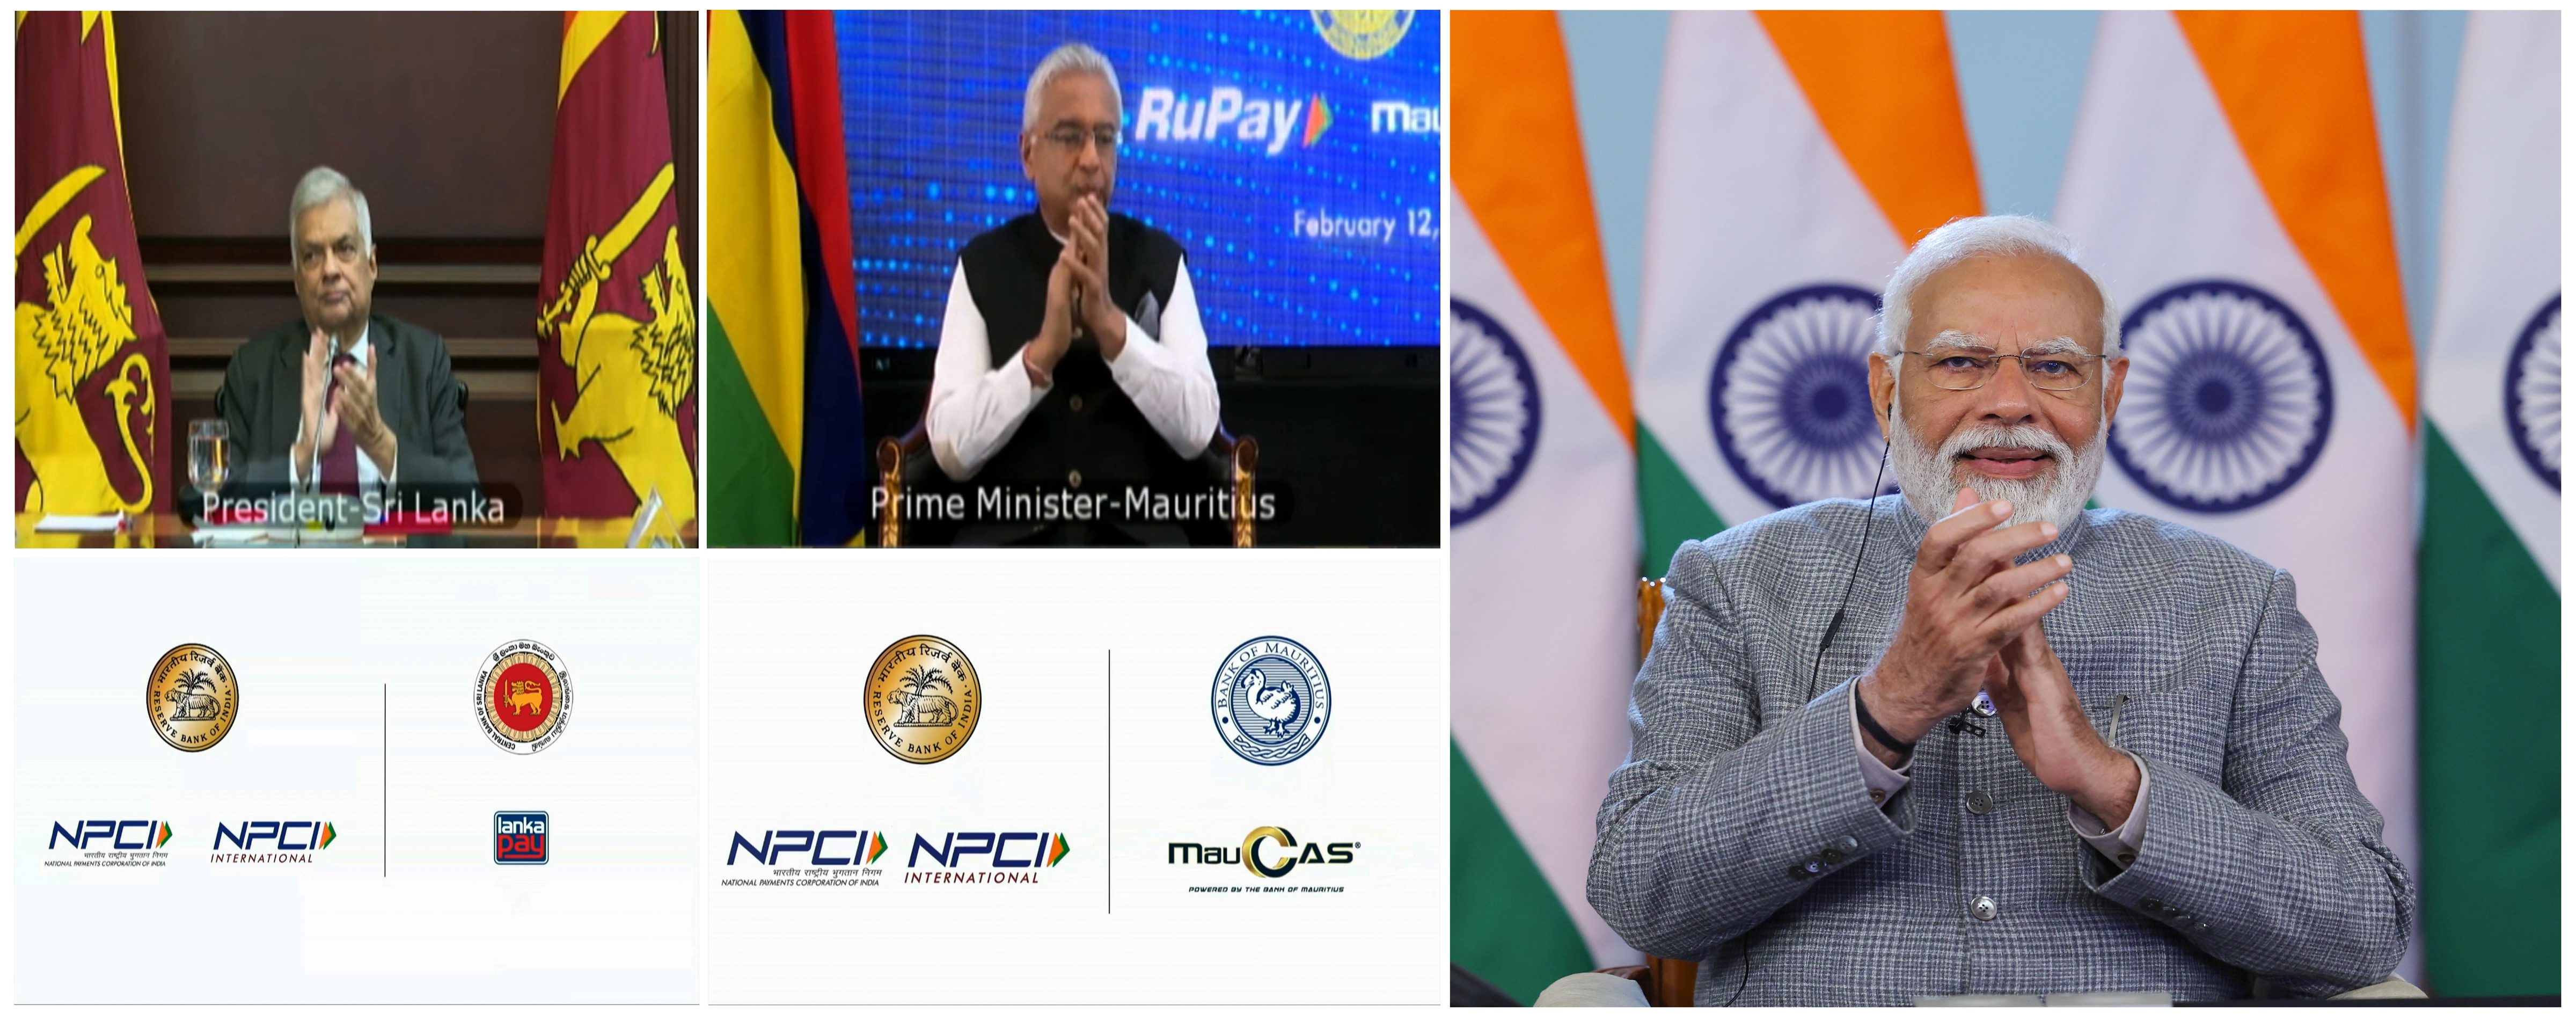 upi payment services launched in sri lanka, mauritius; pm describes it as 'special day'